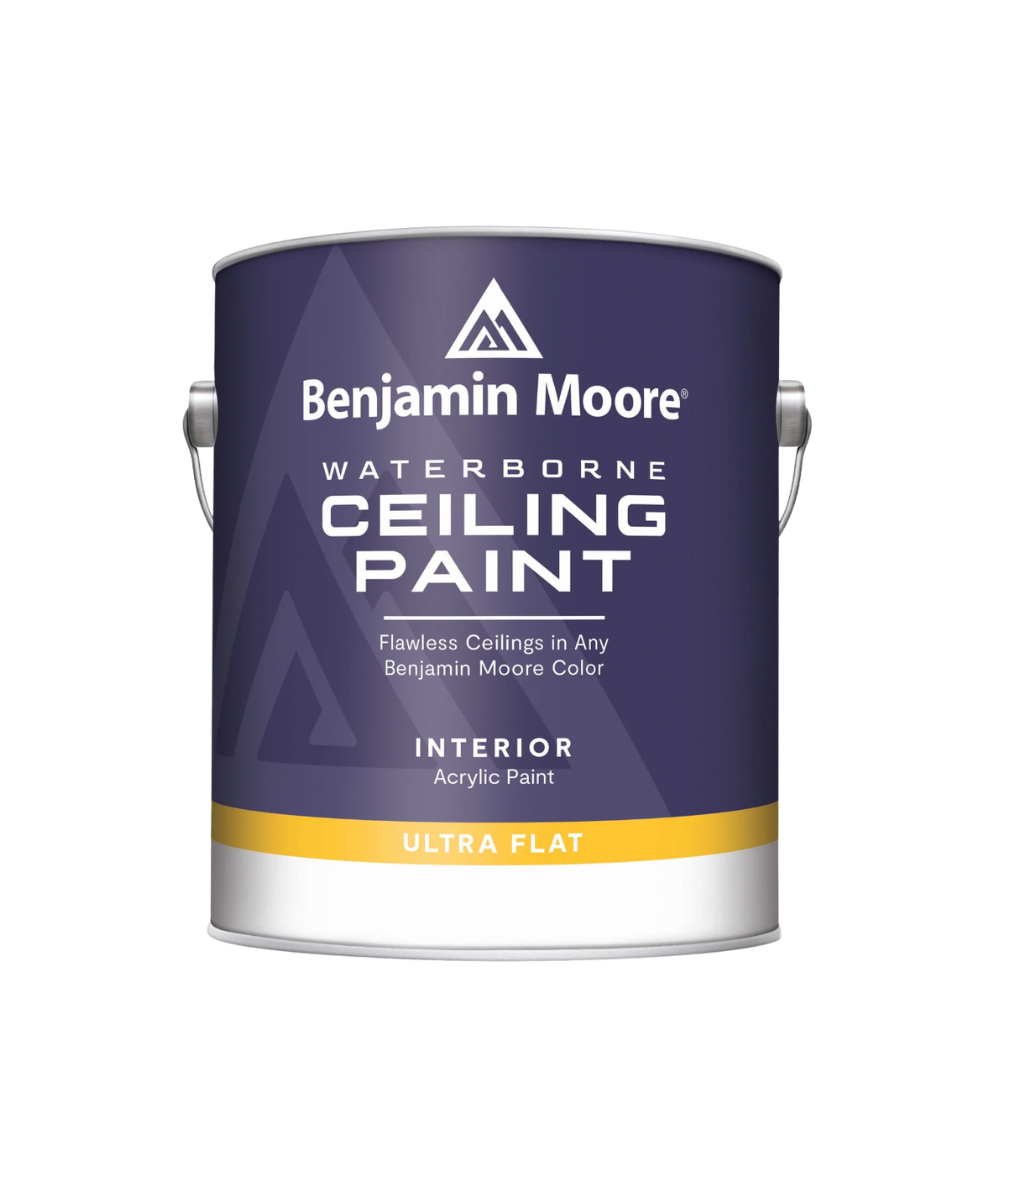 Benjamin Moore Waterborne Ceiling Paint available at Catalina Paints.